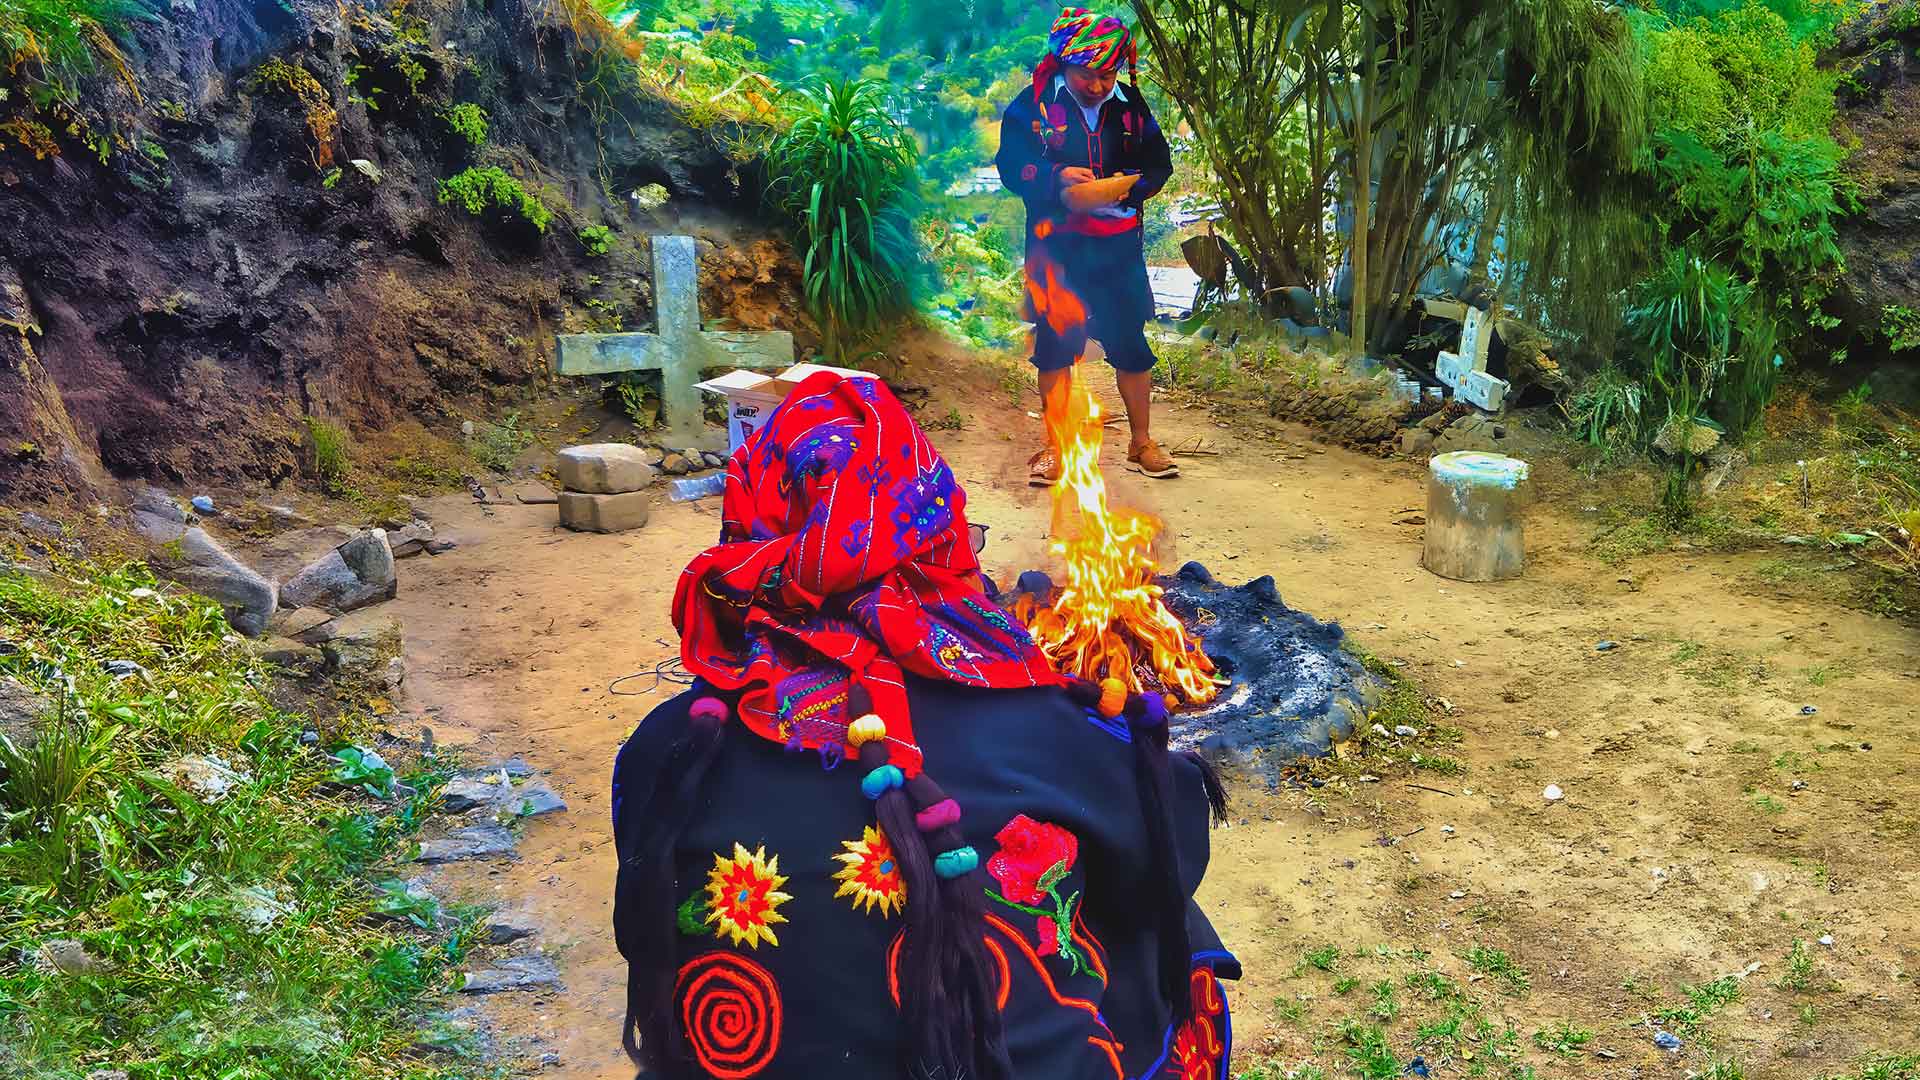 Guatemala Maya Shamanic Ceremonies: "Two Maya priests engaged in a Guatemala Maya Shamanic Ceremony at a sacred shrine, seated opposite each other with a firelight altar between them, wearing vibrant ceremonial attire."